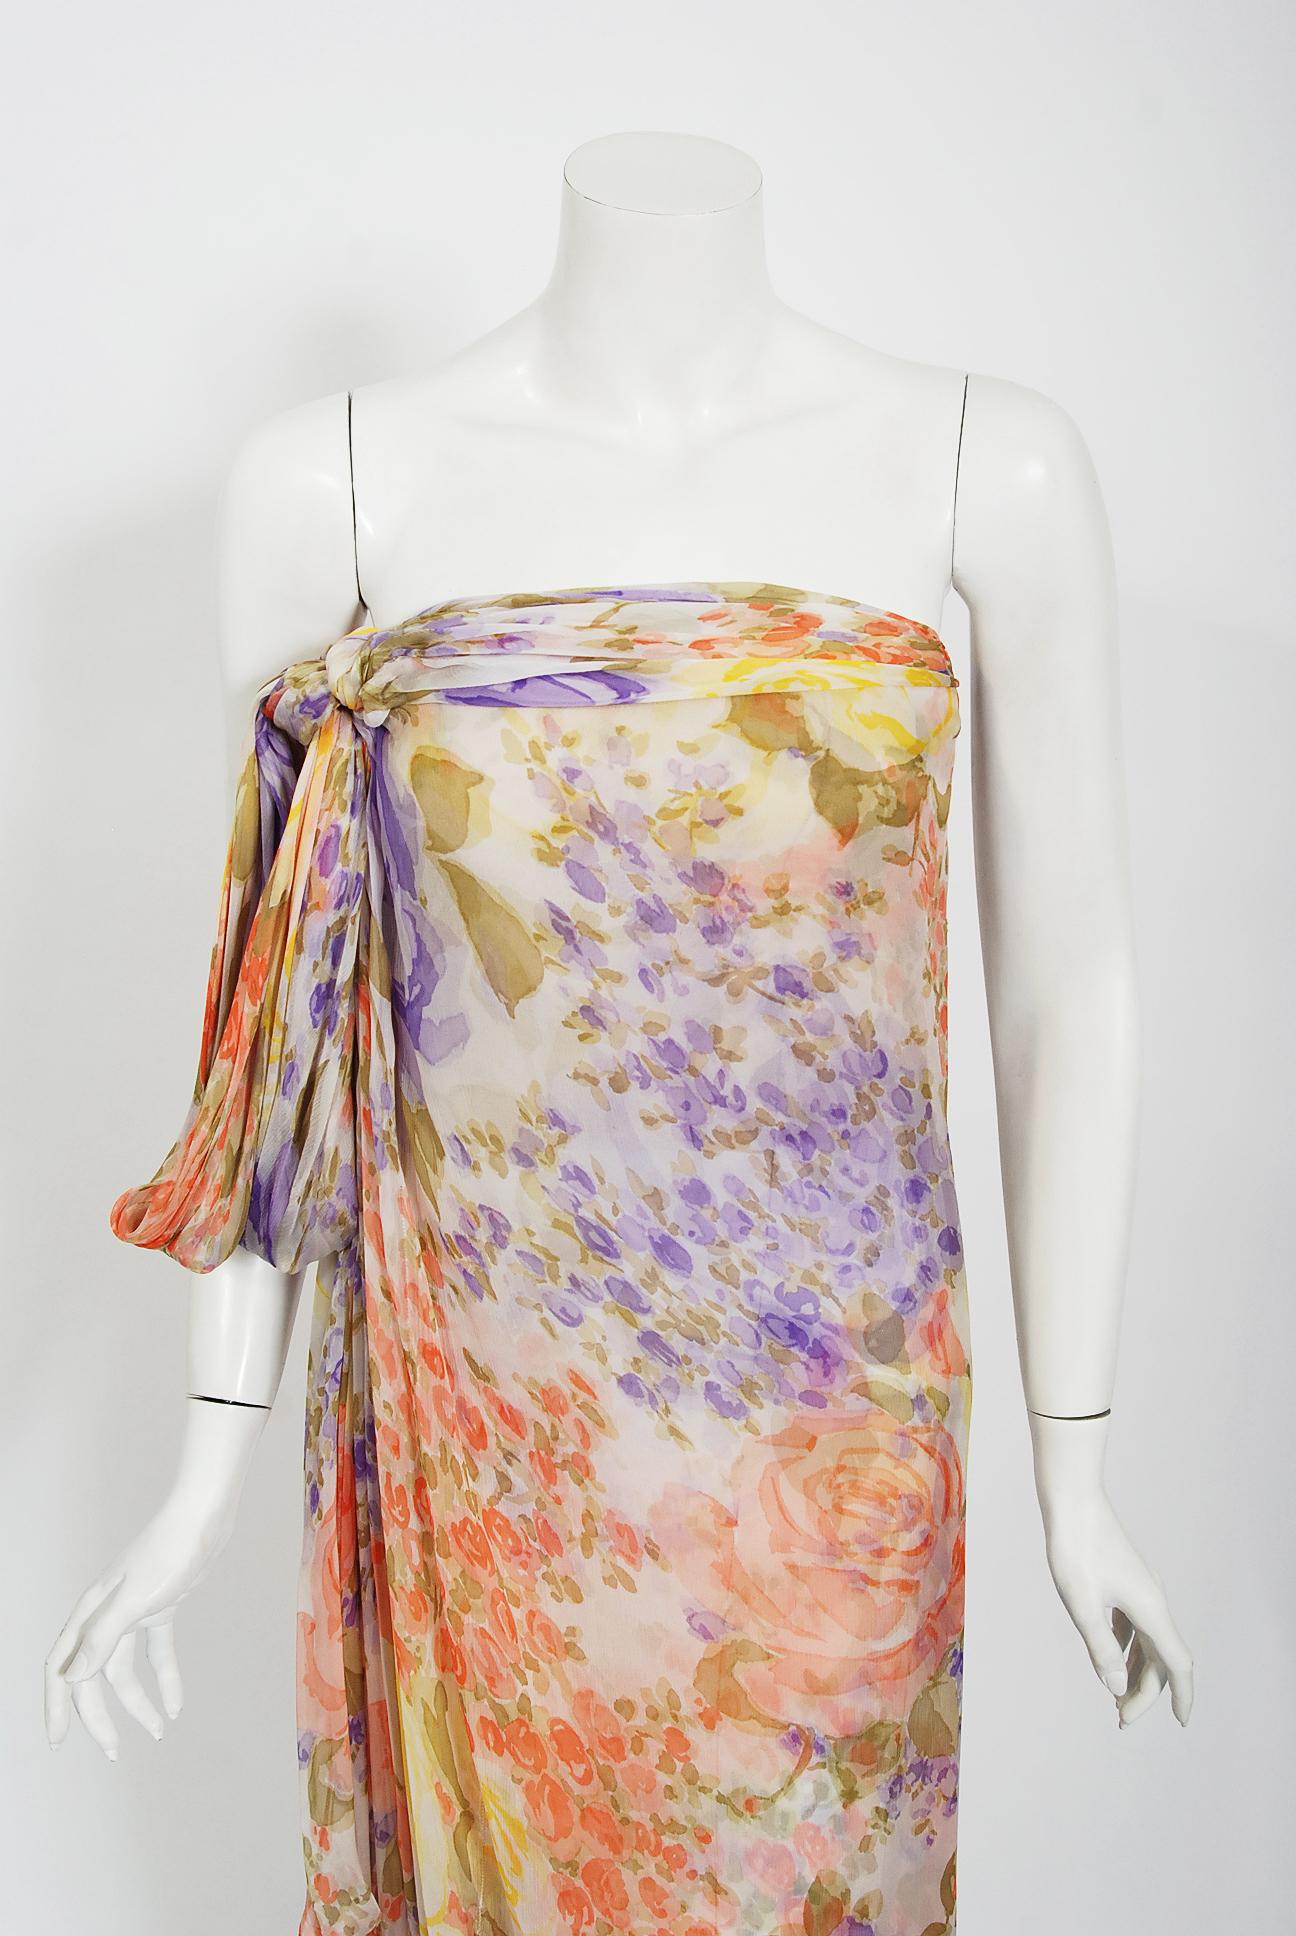 This extremely gorgeous Lanvin Haute Couture rose-garden floral print gown dating back to the late 1970's. I love the beautiful mix of purple, orange and yellow colors. As shown, the elegant bodice wraps over in a Grecian goddess vibe. I love that